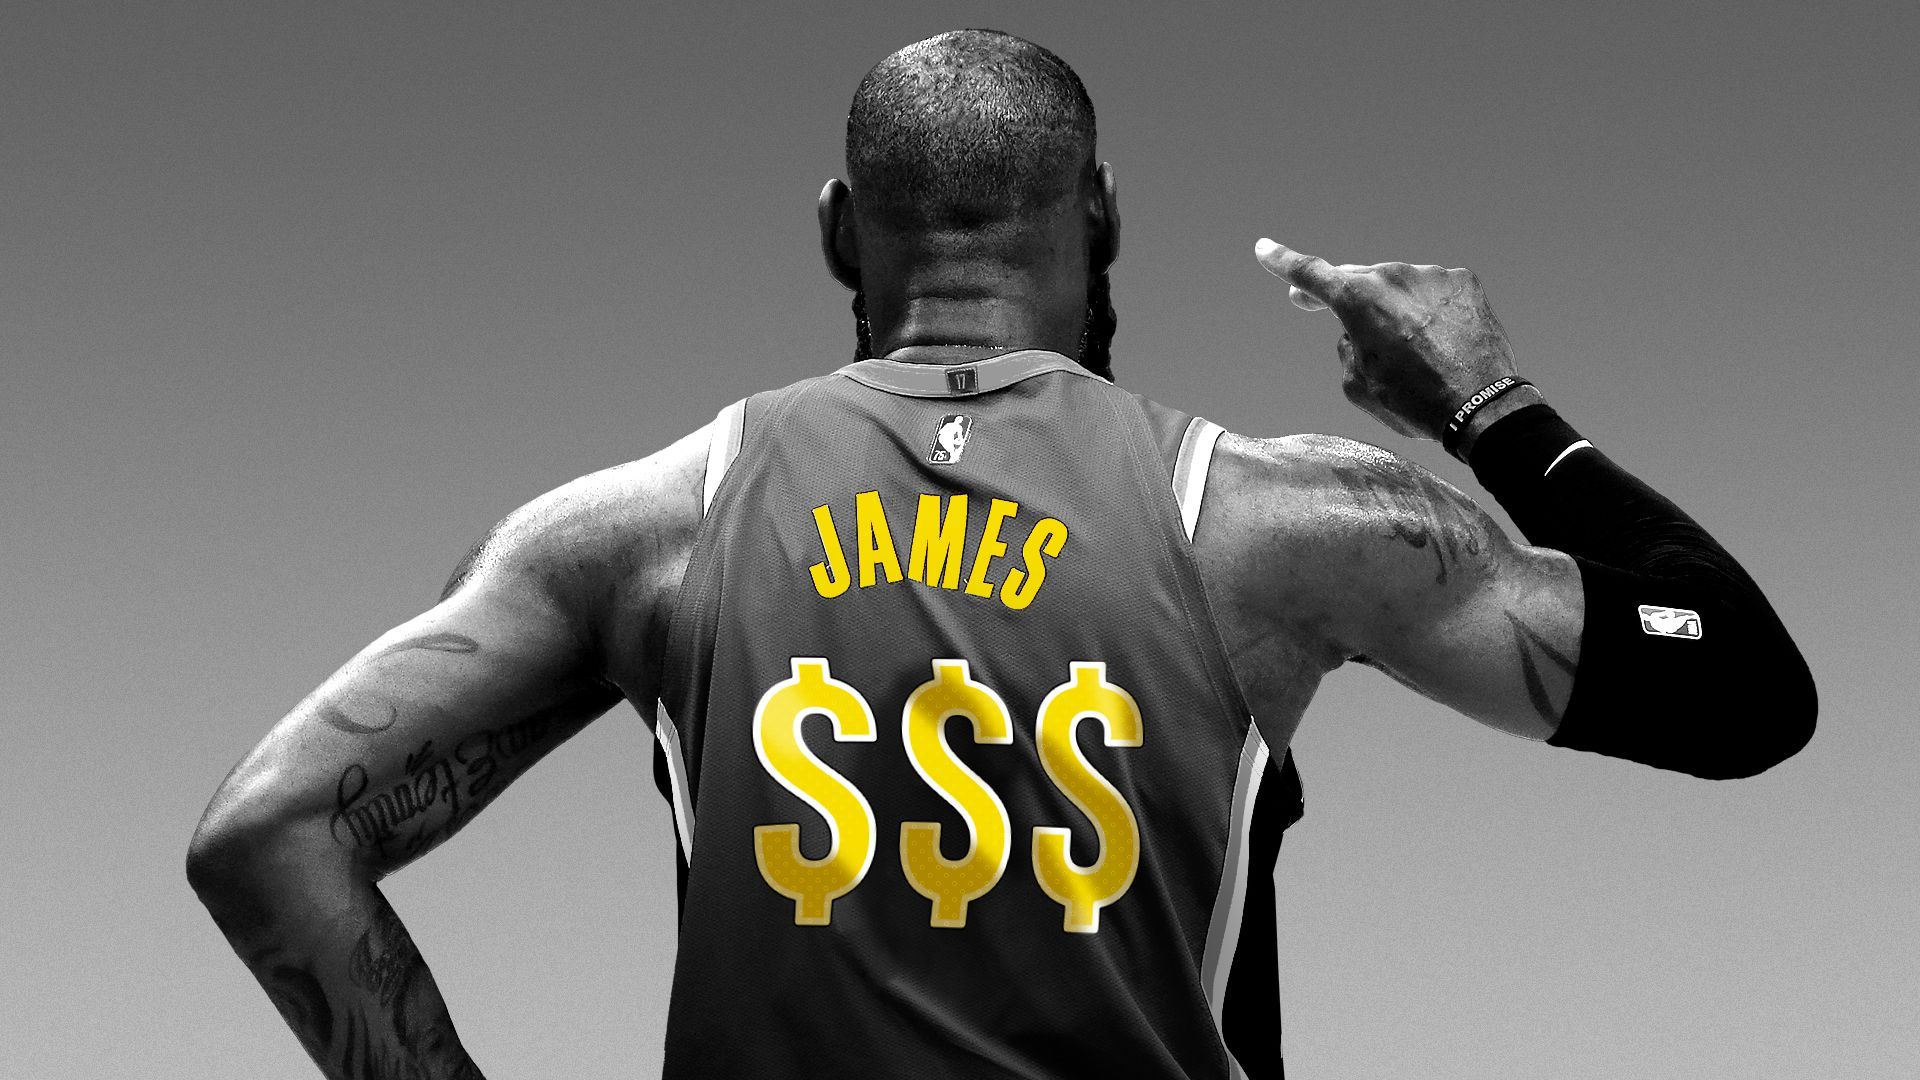 Photo illustration of Lebron James from behind with dollar signs on his jersey